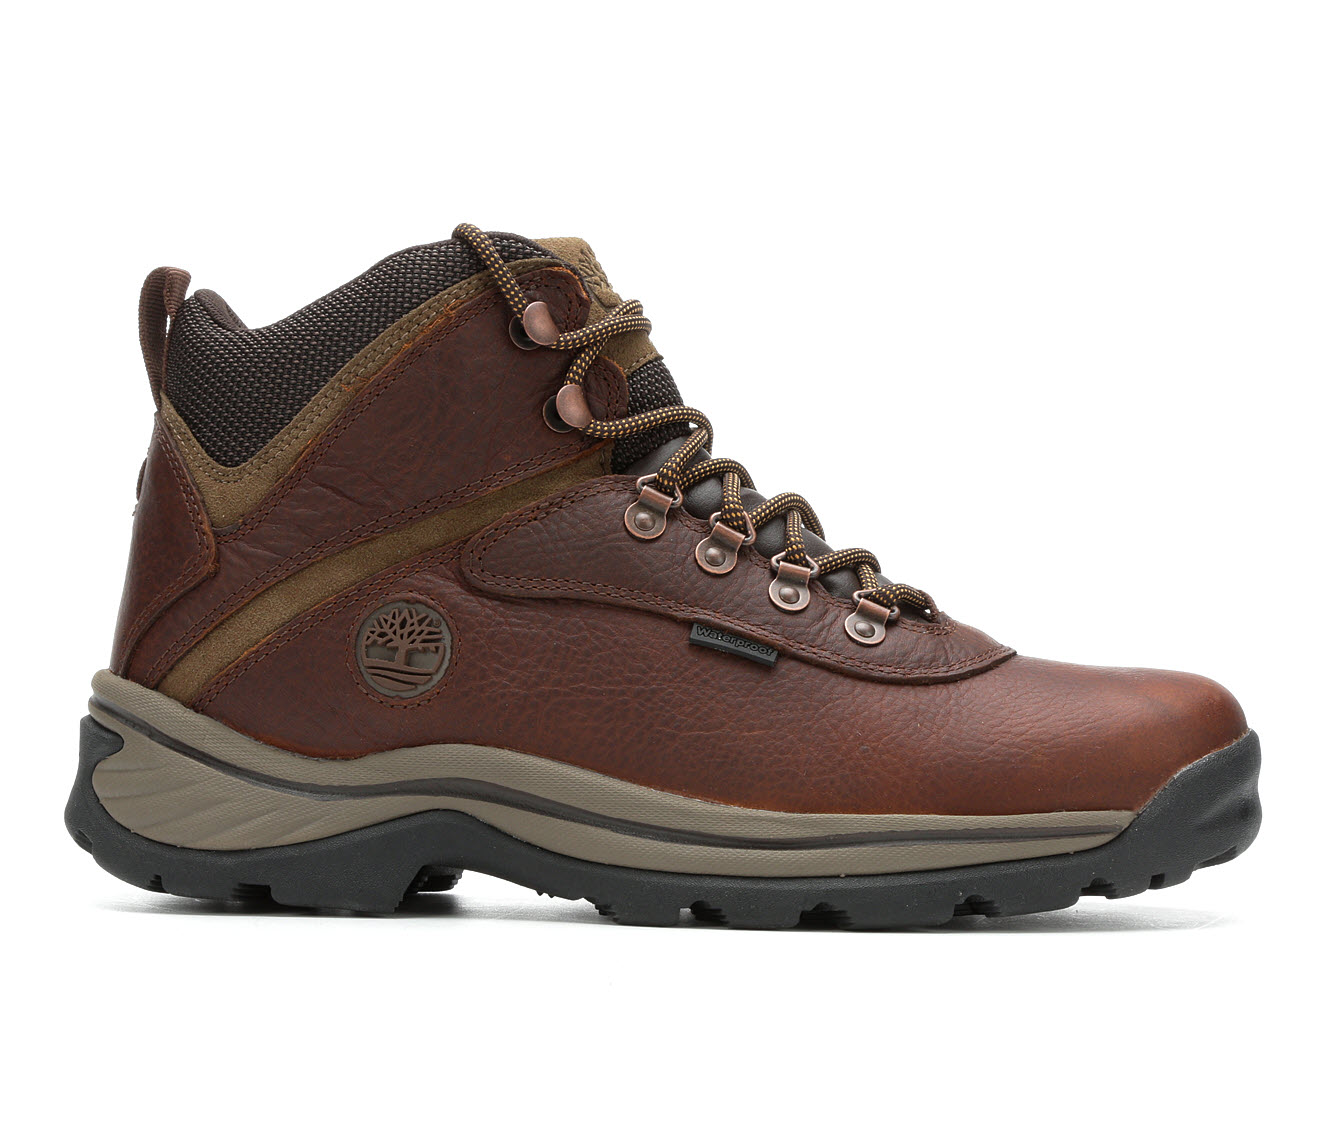 Timberland White Ledge Waterproof Men's Boots (Brown Leather)